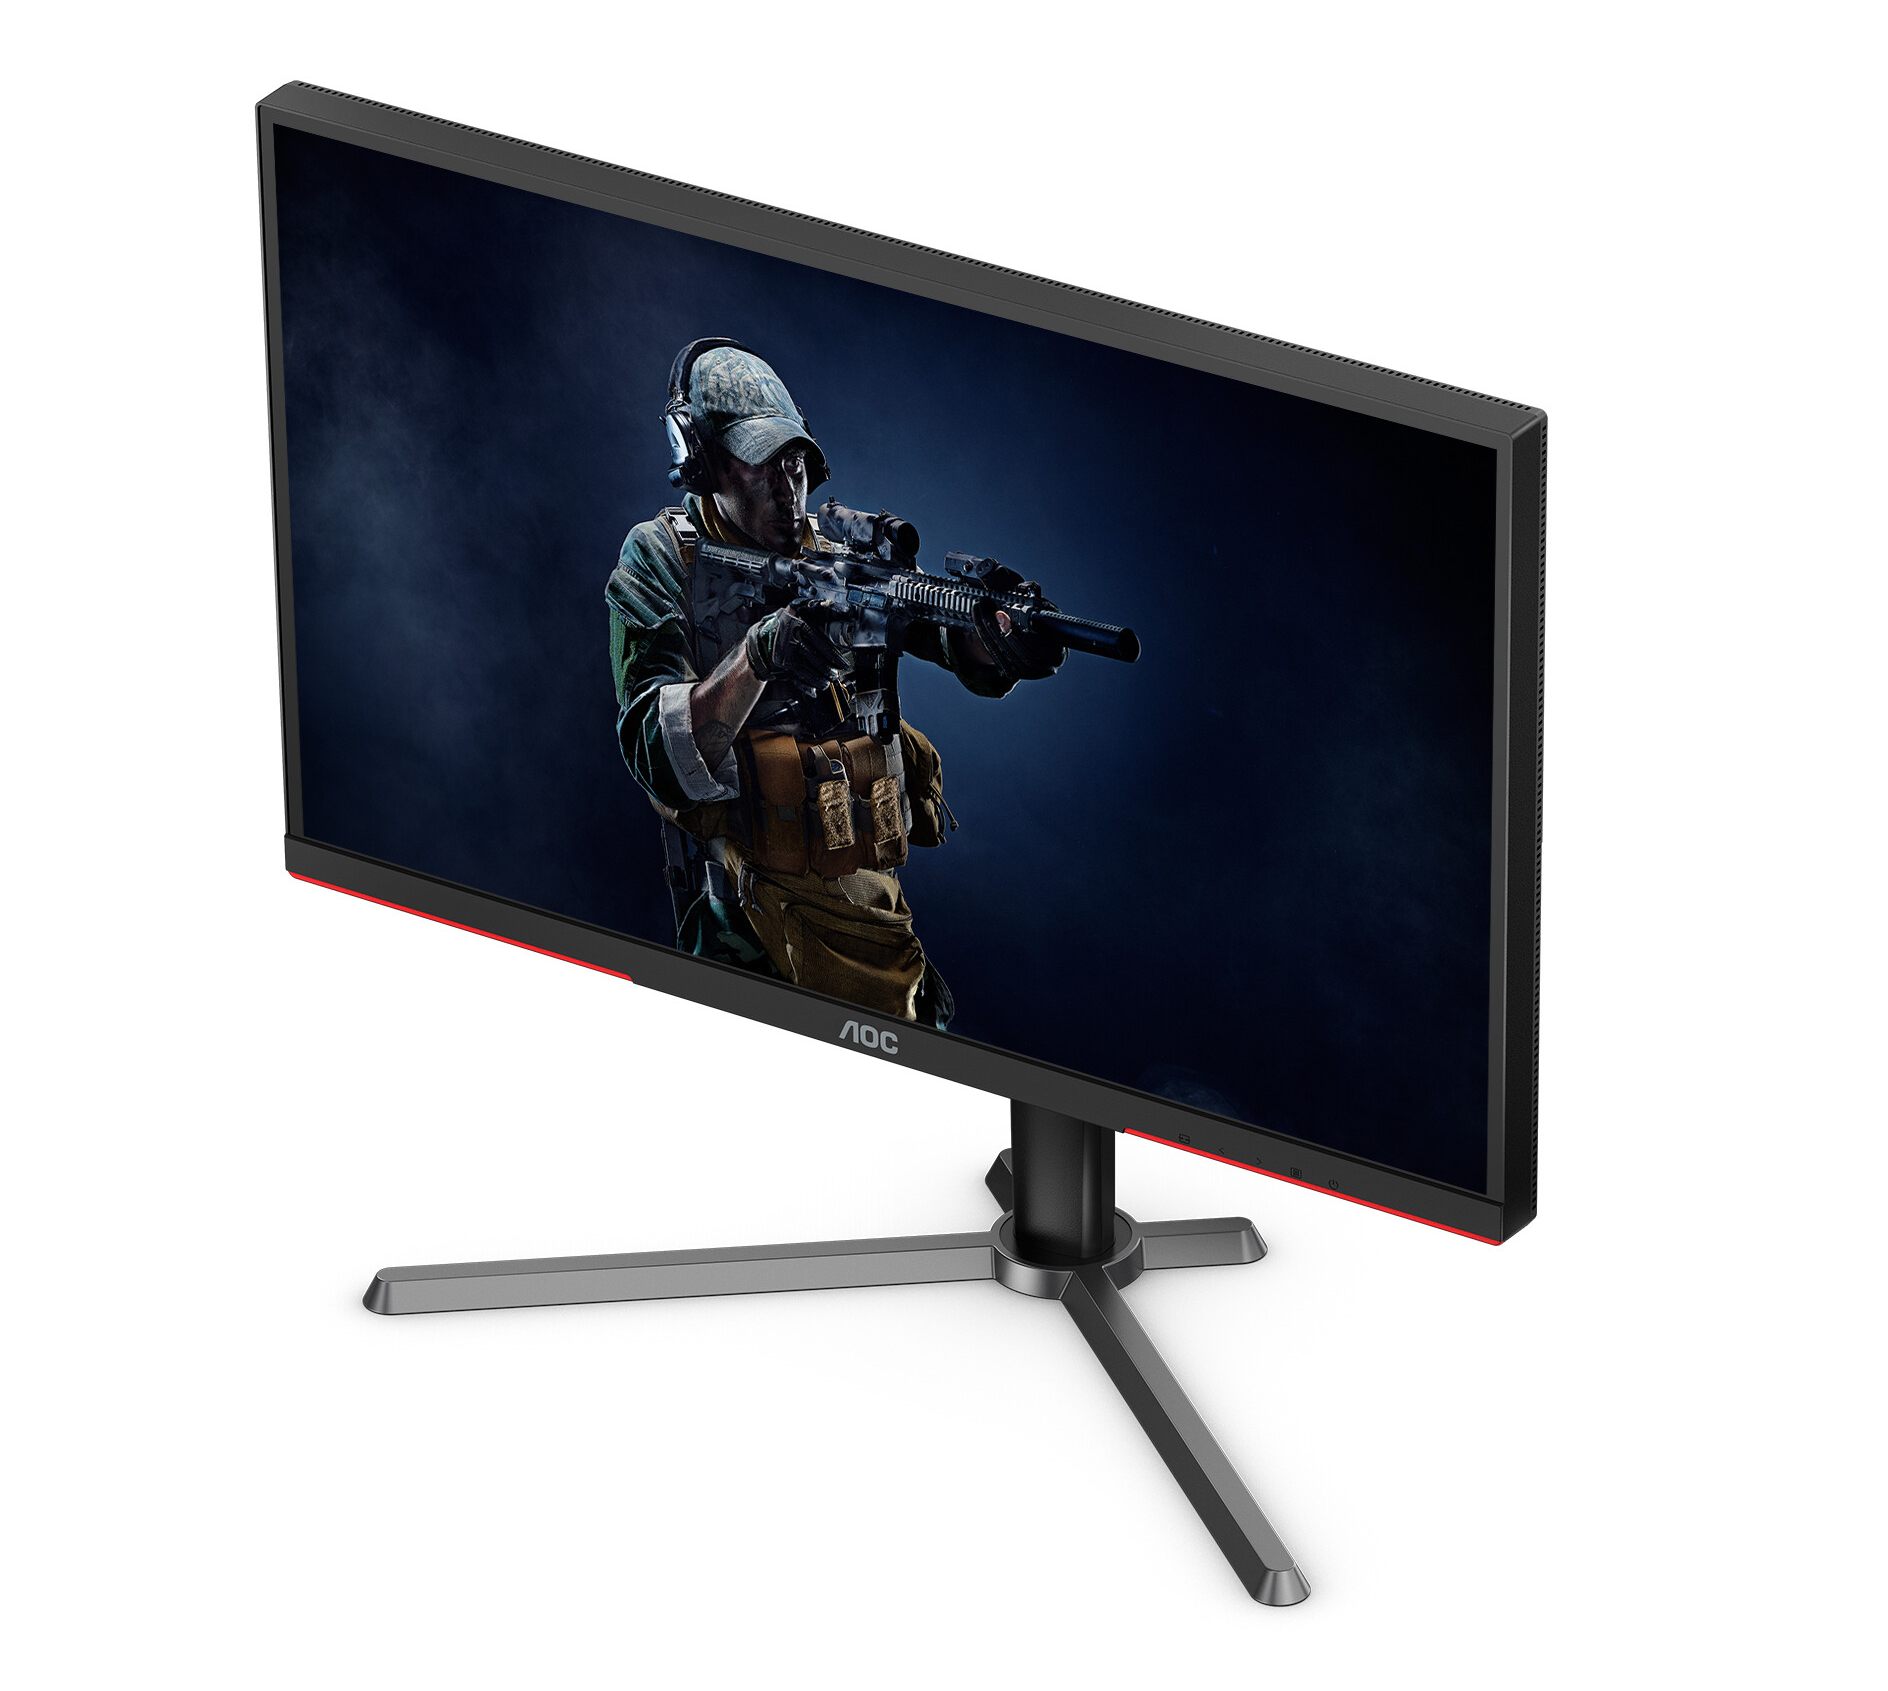 definitive dommer talent AOC Q27G3XMN: New Mini LED gaming monitor lands with 180 Hz refresh rate  and 1,000 nits peak brightness - NotebookCheck.net News